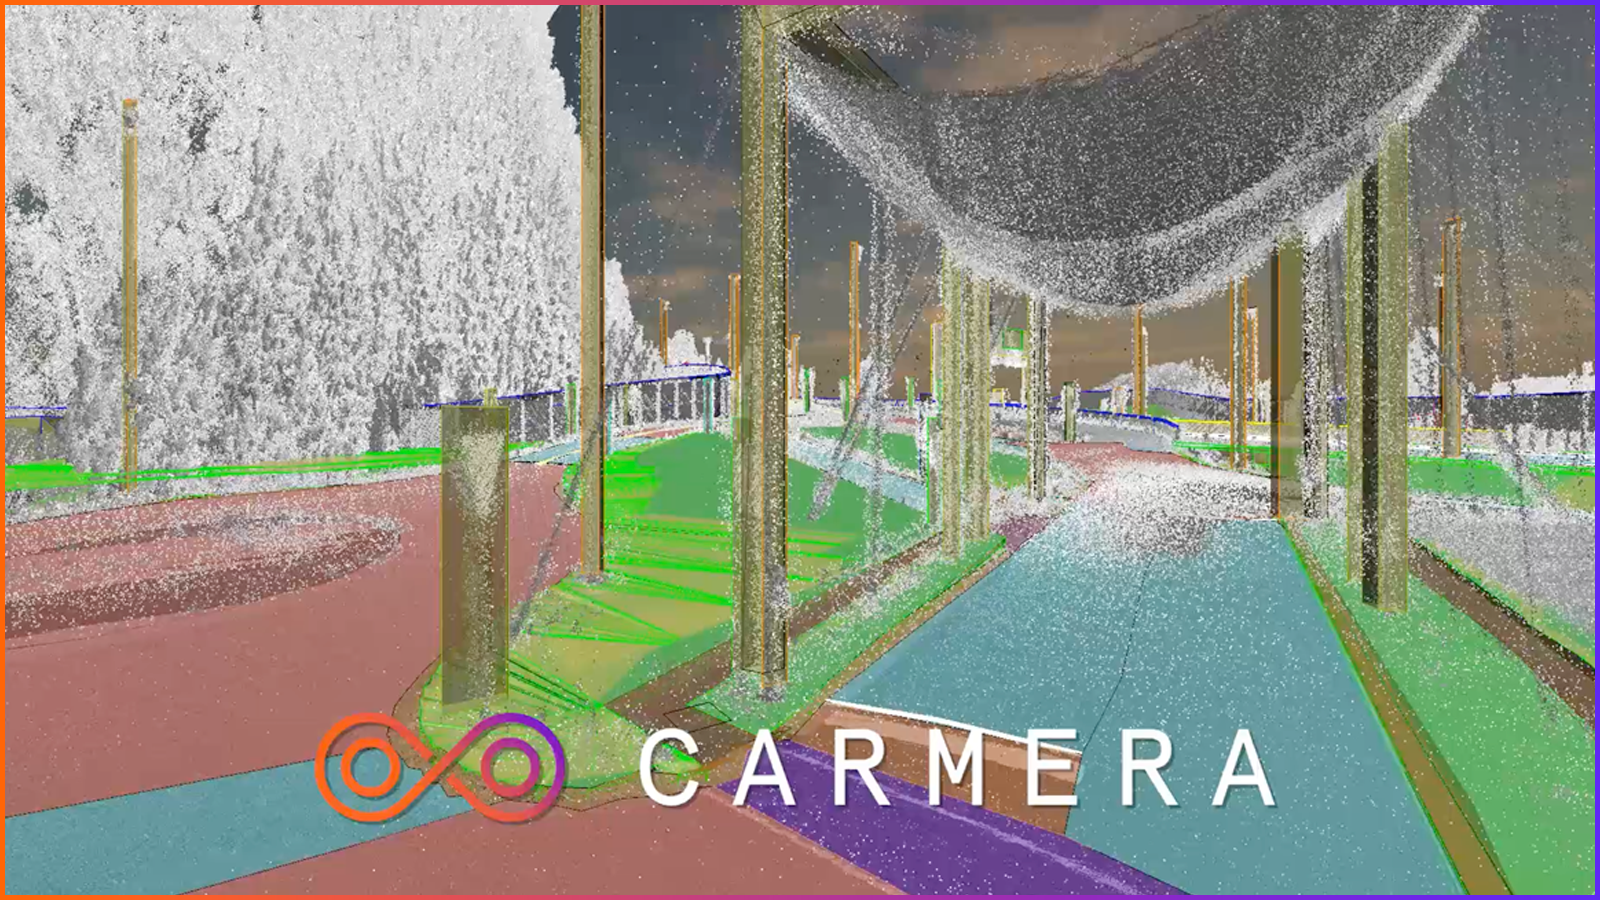 Computer generated image of Mcity featuring Carmera's logo